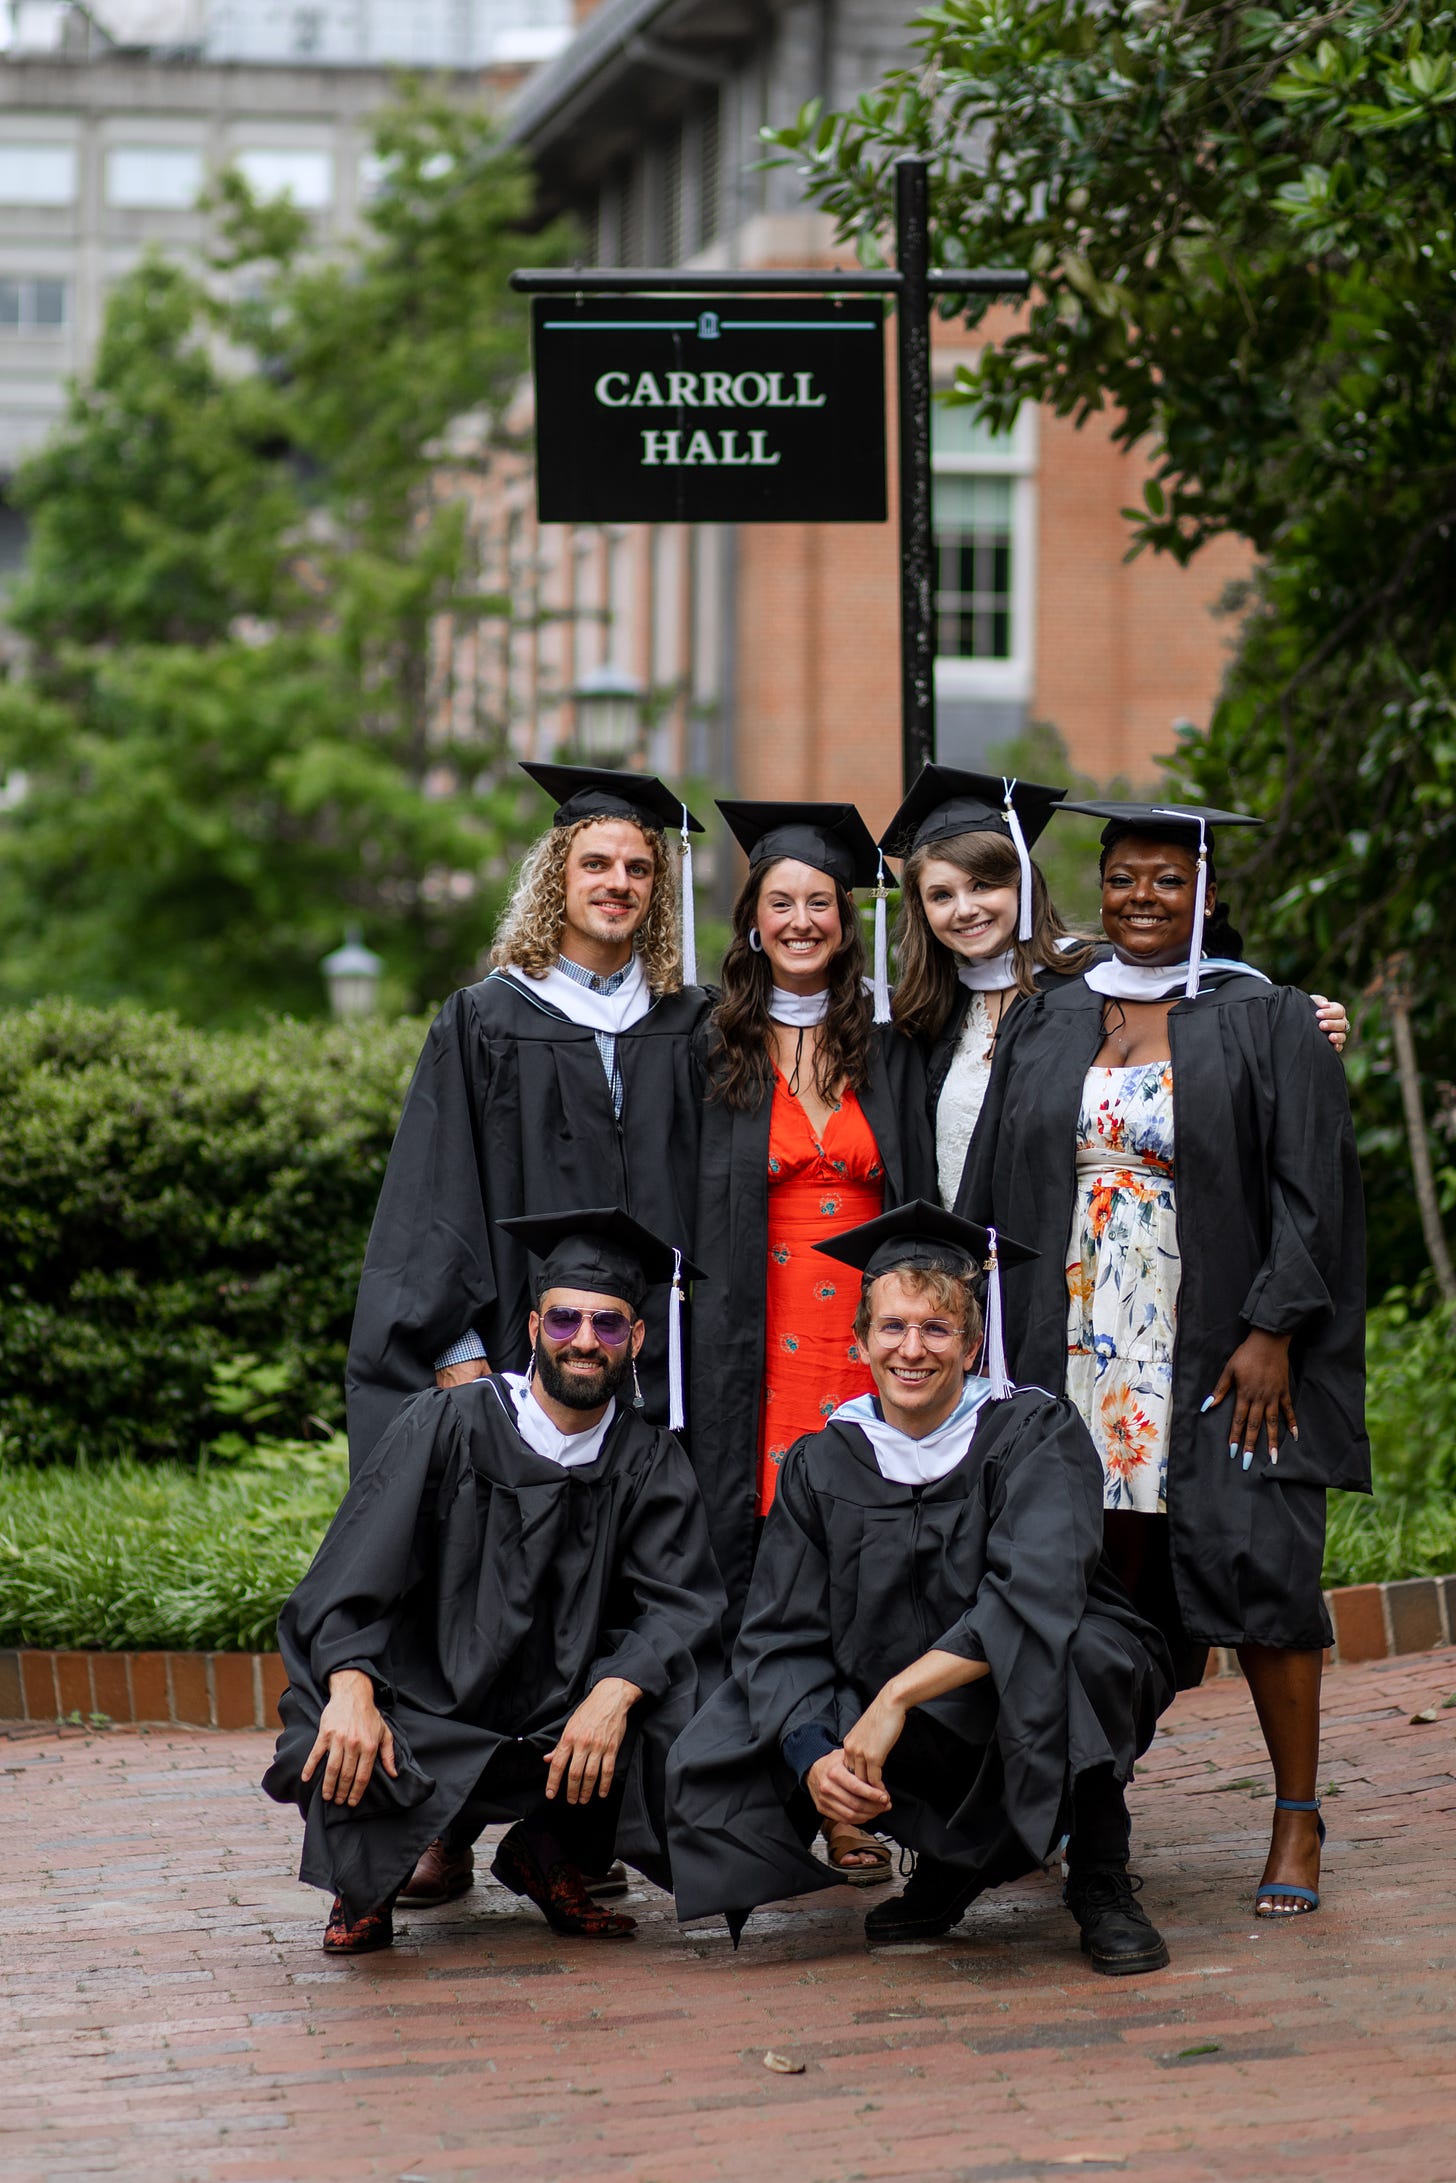 My cohort stands in front of the sign for Carroll Hall wearing our graduation robes.